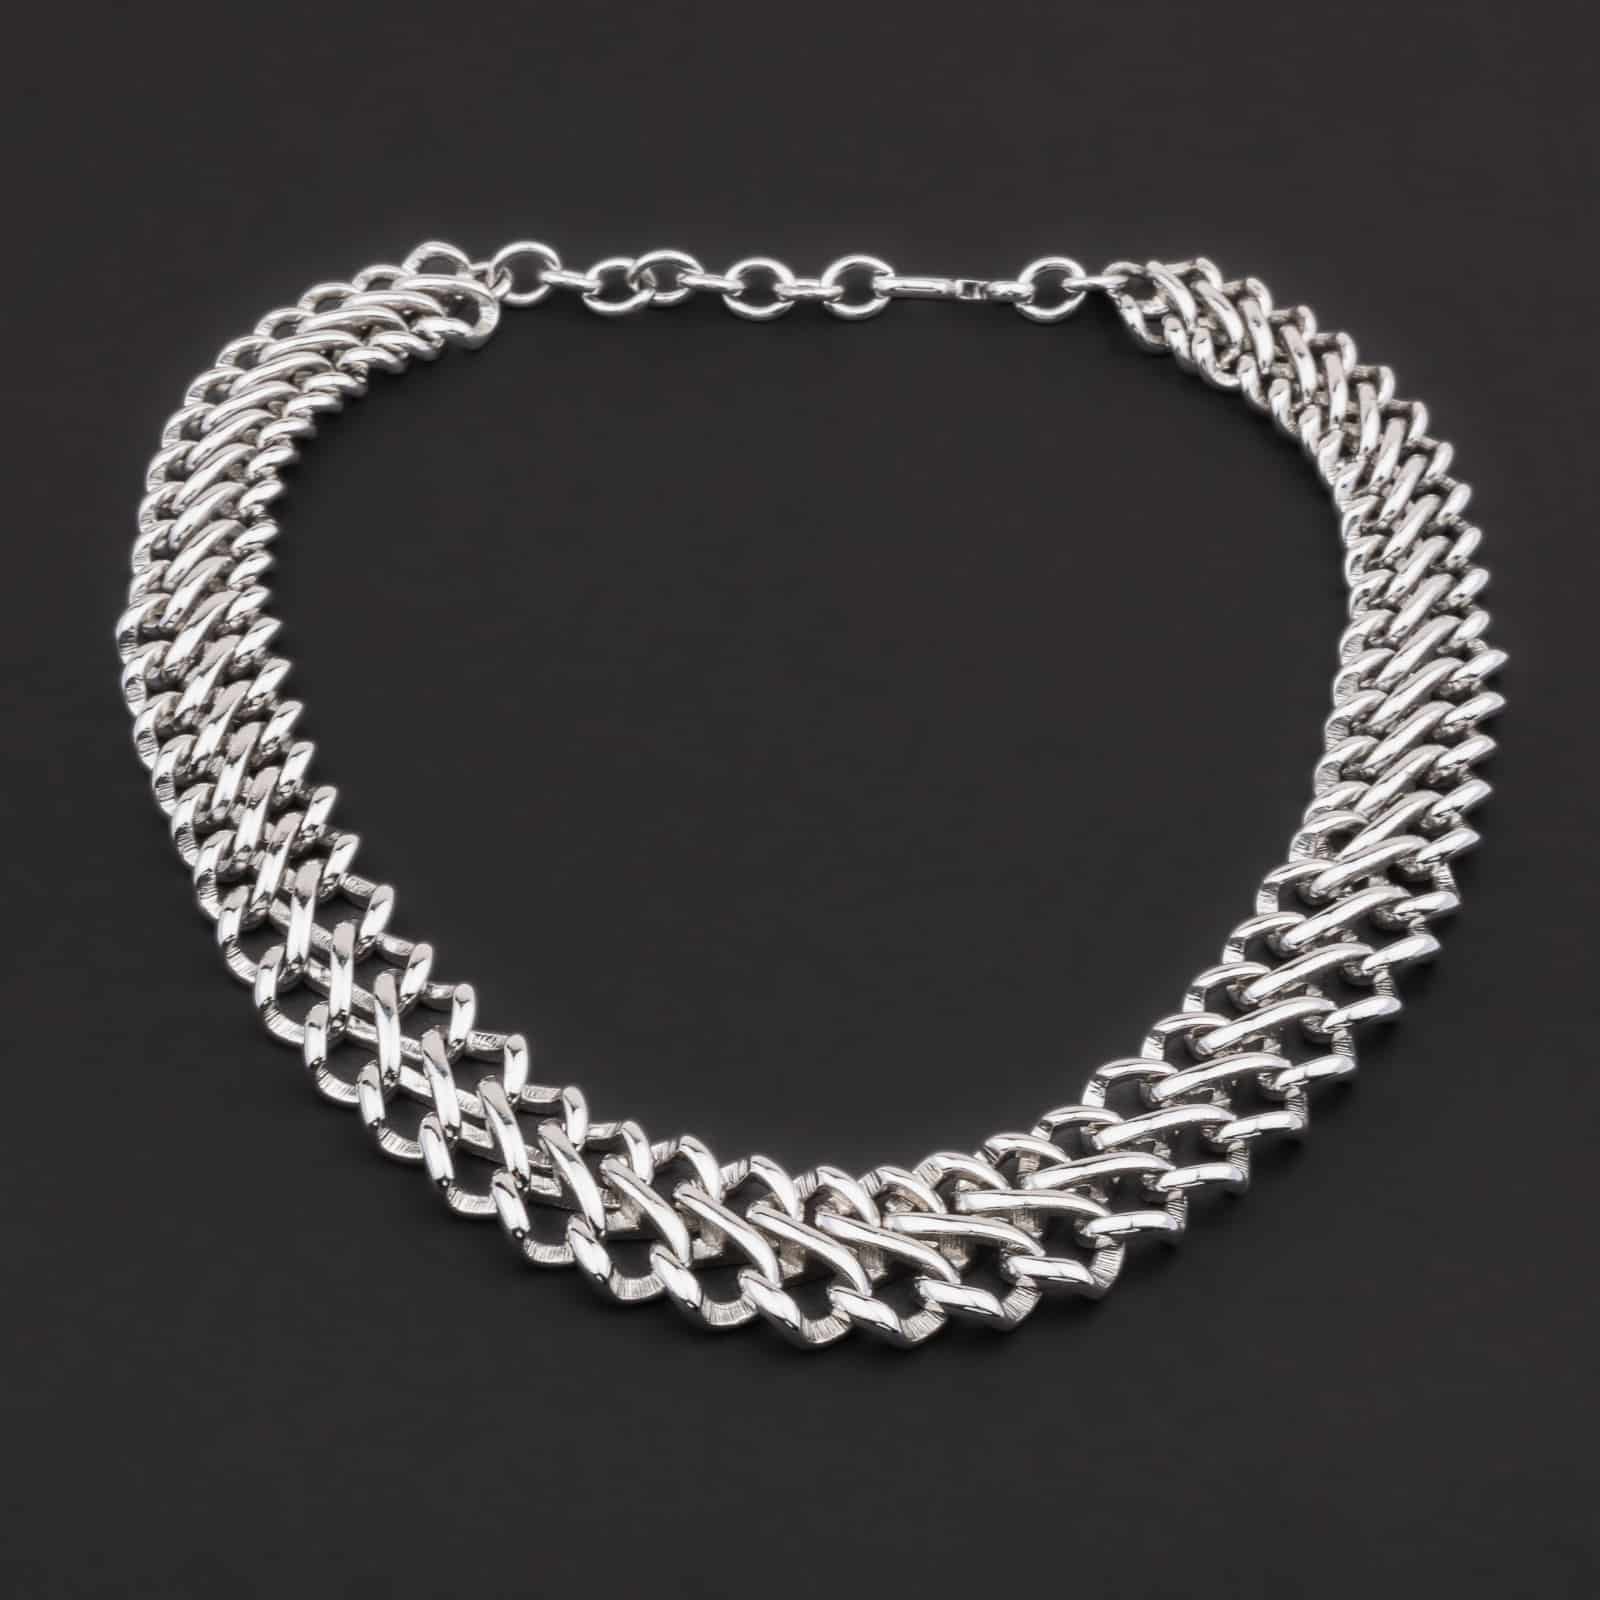 eBlueJay: monet silver plated chain link flat choker necklace mint unused